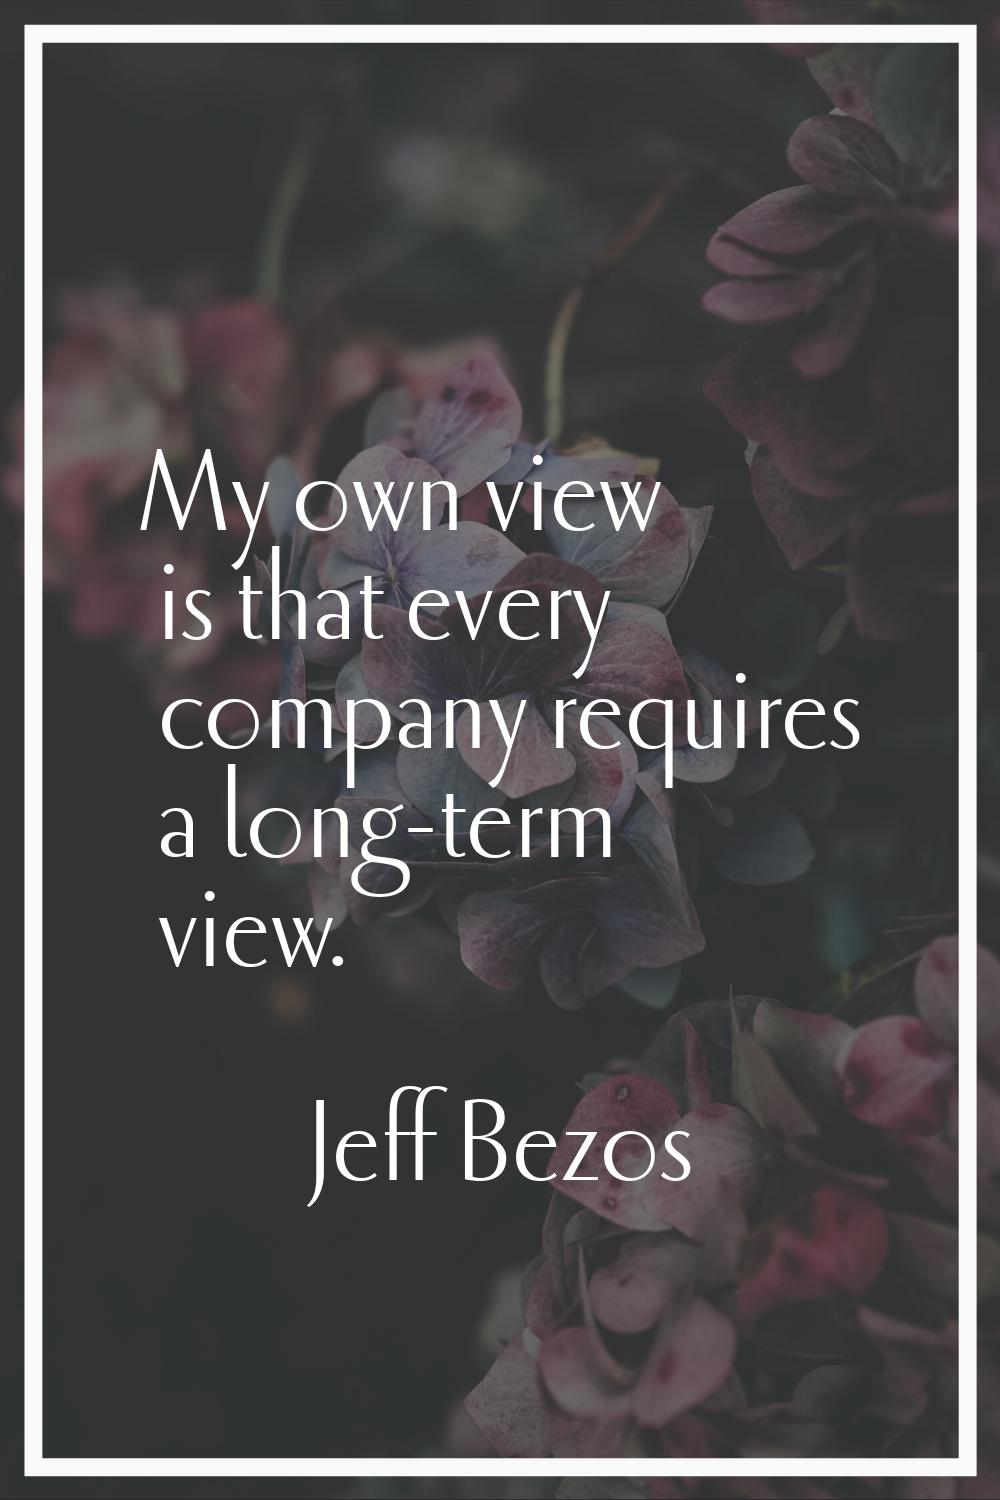 My own view is that every company requires a long-term view.